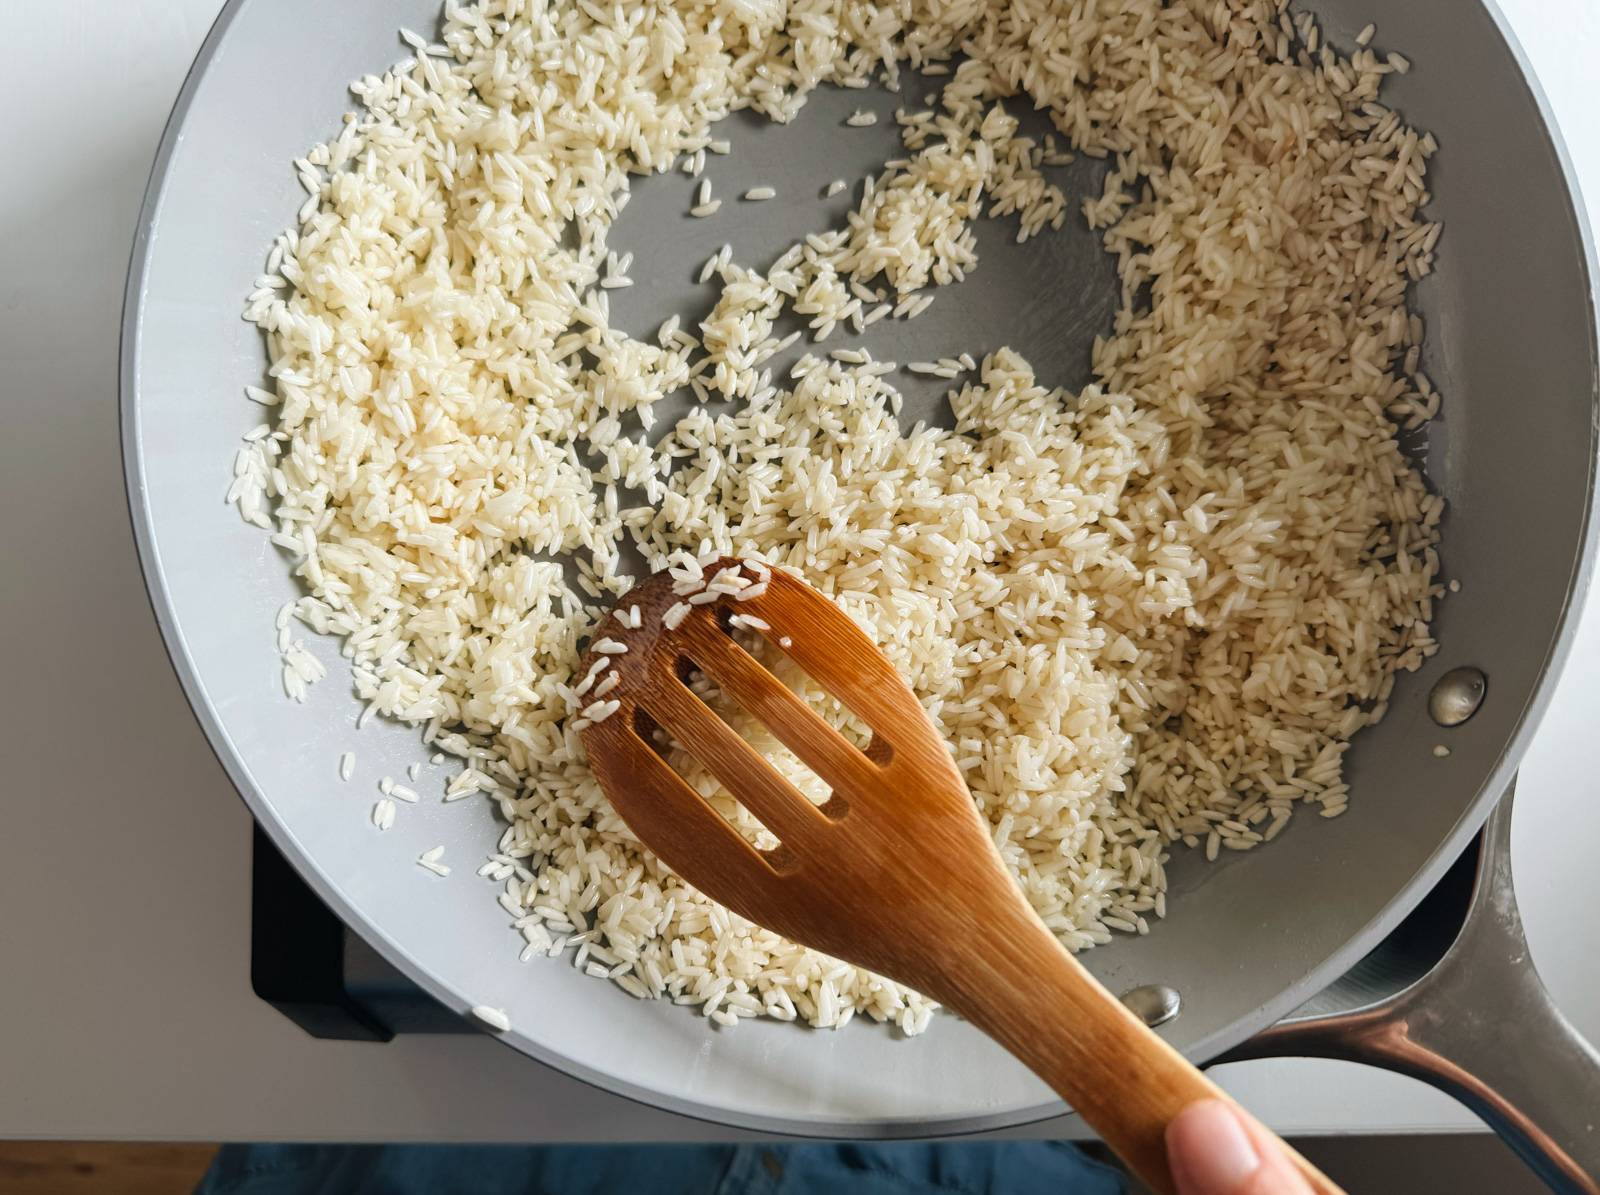 Toasting the rice in a skillet